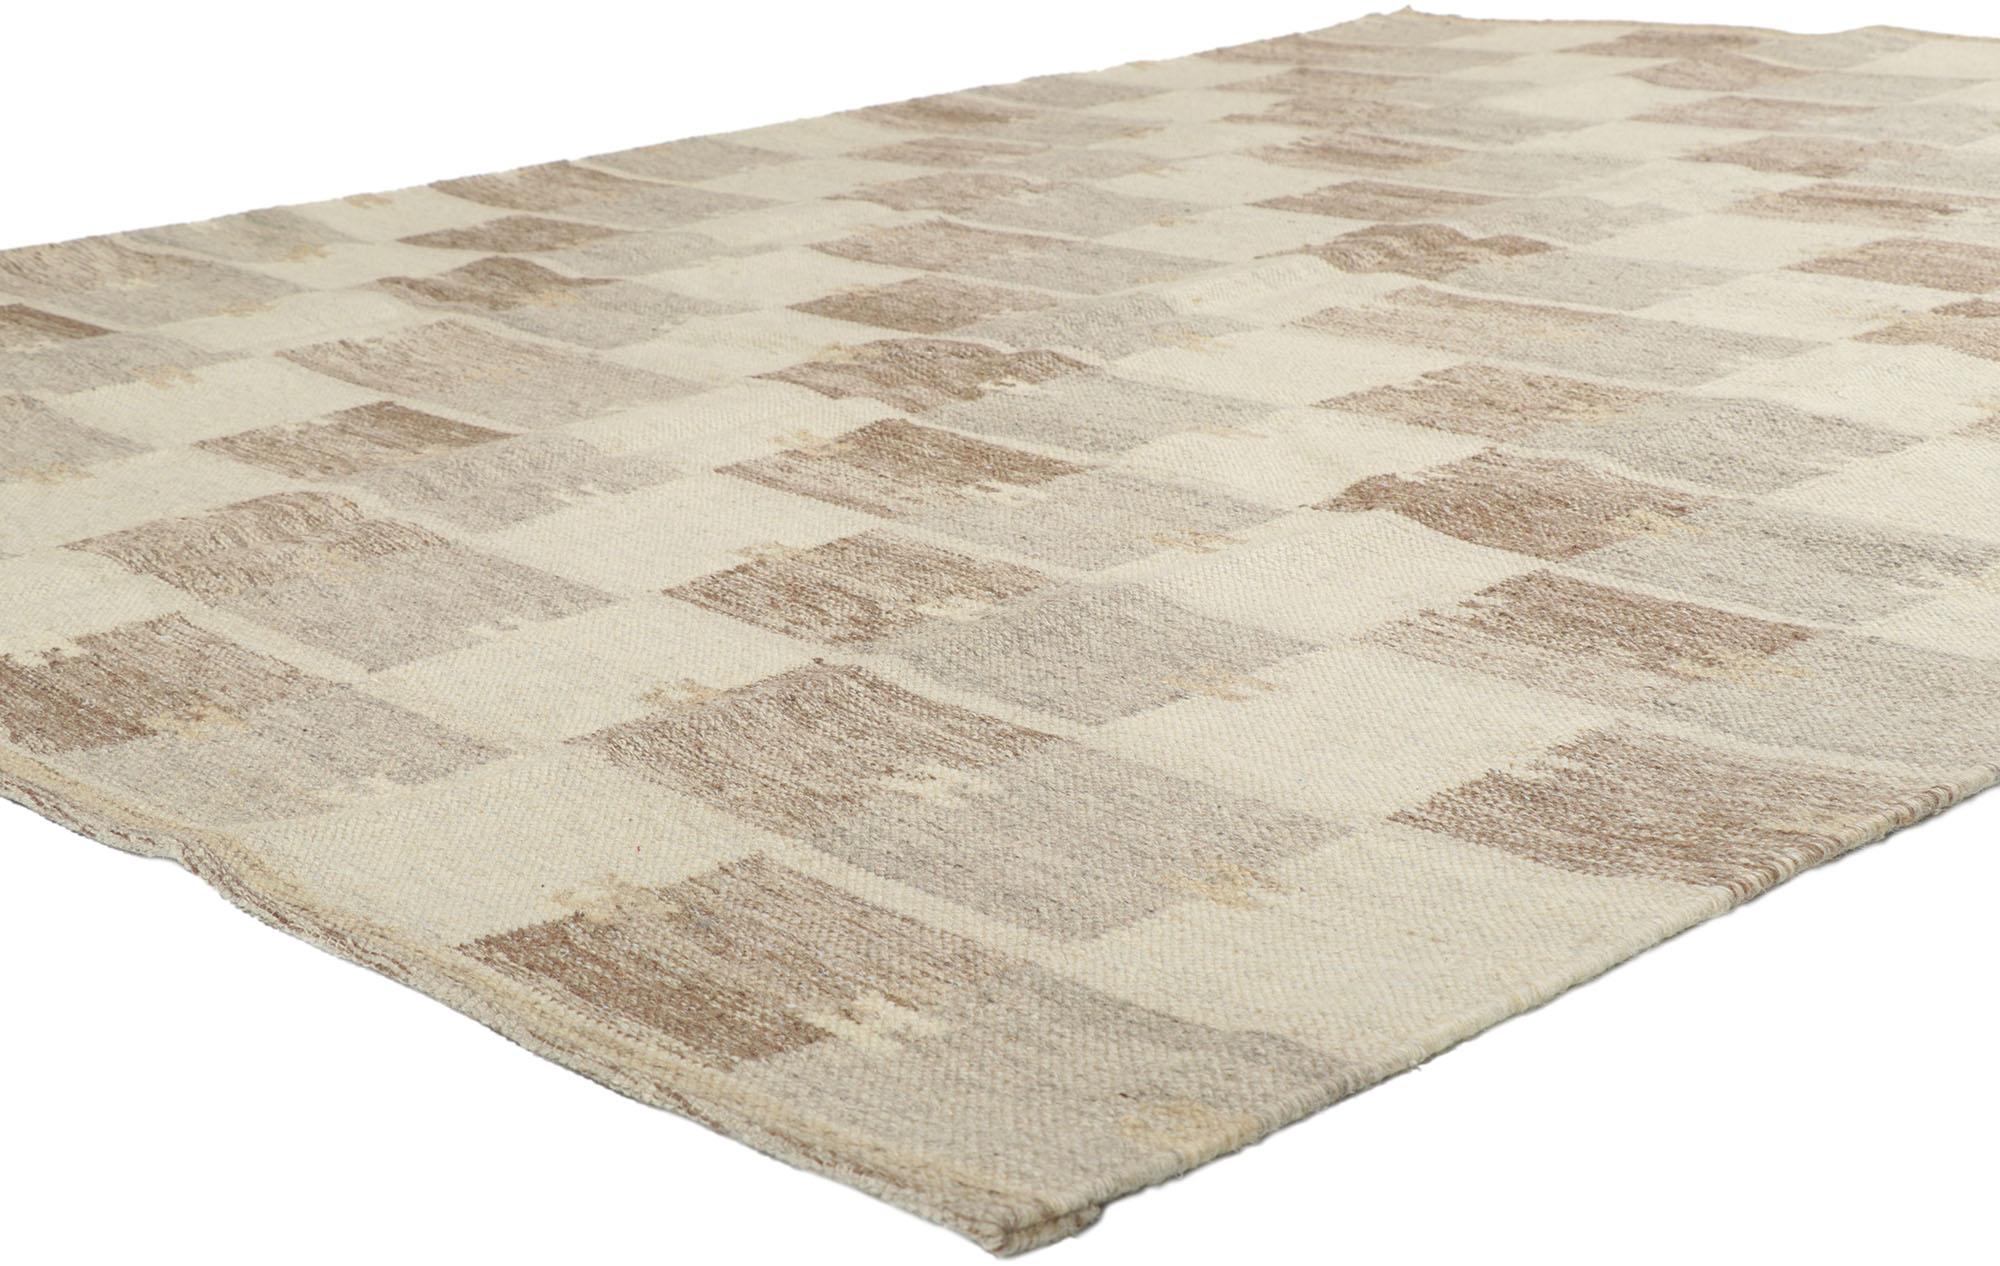 30683 New Swedish Barbro Nilsson Inspired Kilim rug with Scandinavian Modern Style 08'00 x 10'00. With its simplicity, geometric design and light earth-tone colors, this hand-woven wool Swedish inspired Kilim rug provides a feeling of cozy